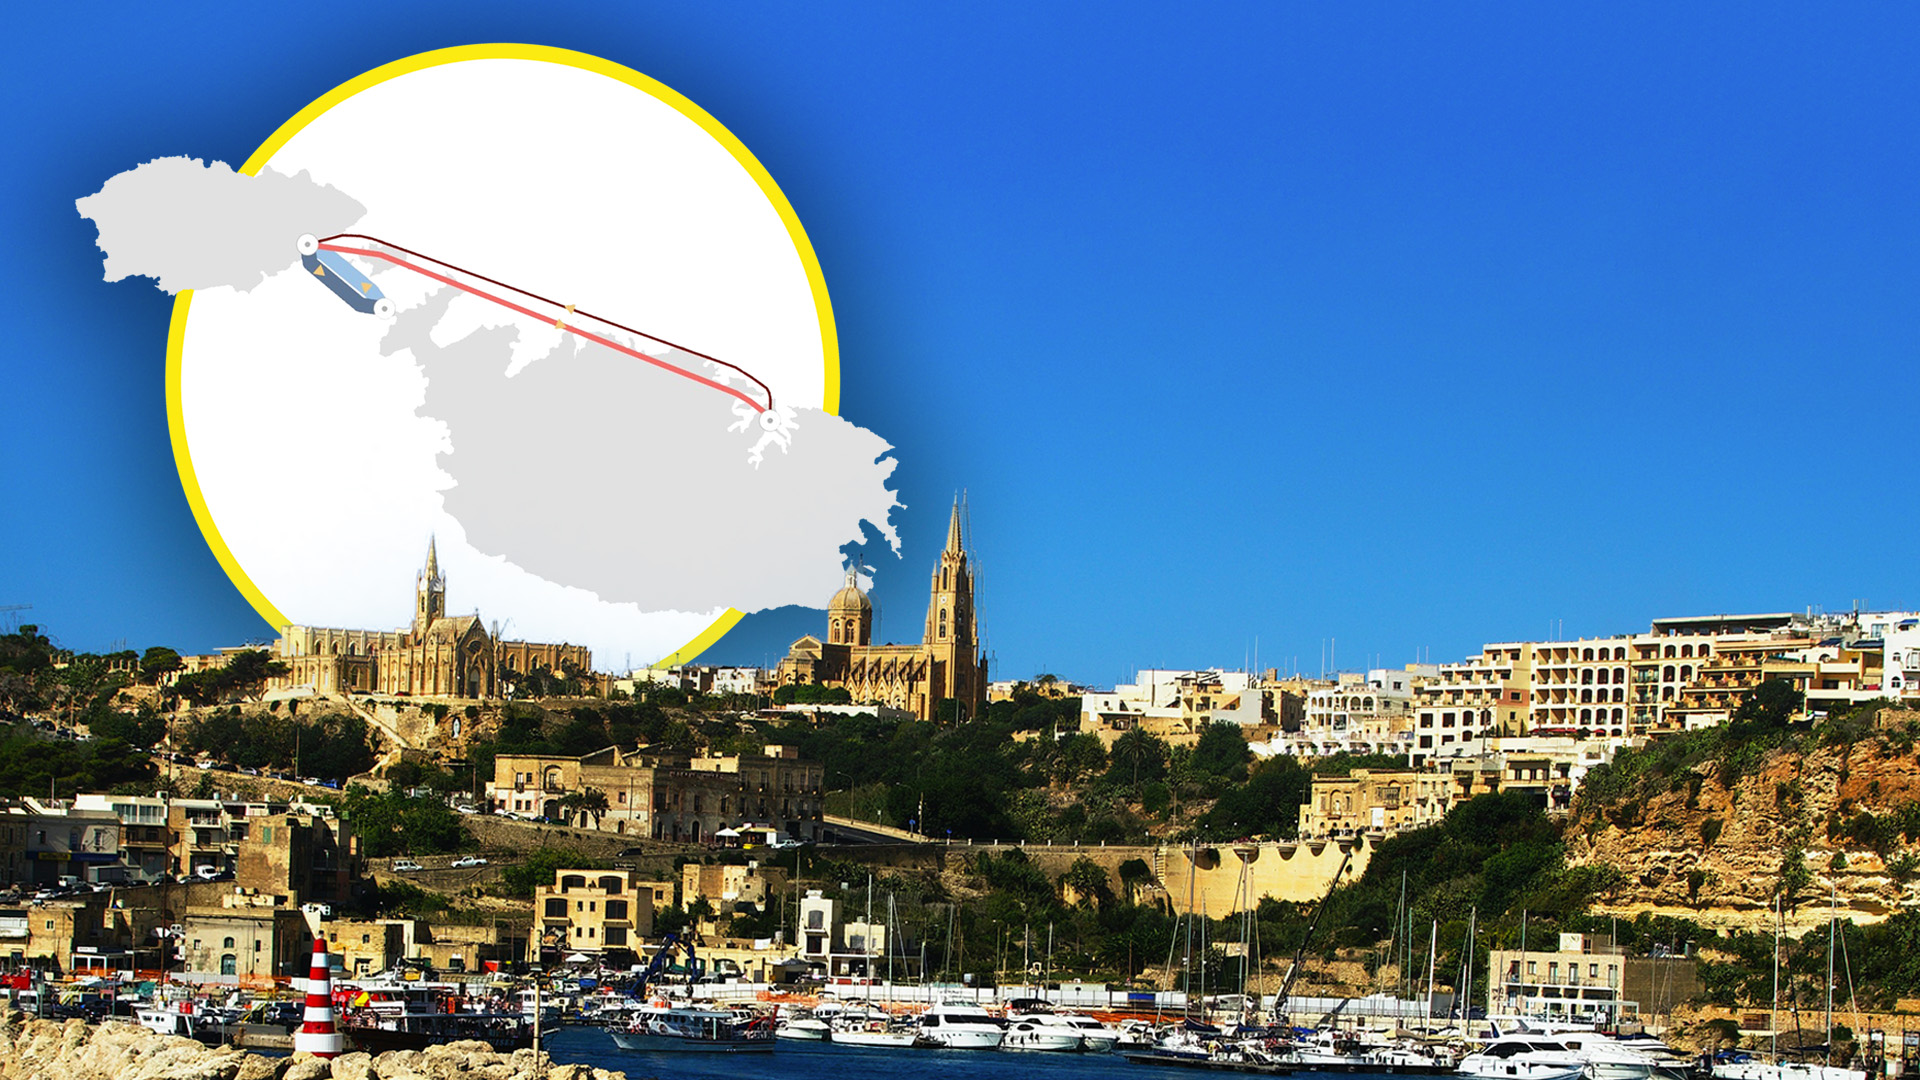 Over 1.2 Million Travel Between Malta & Gozo from January to March